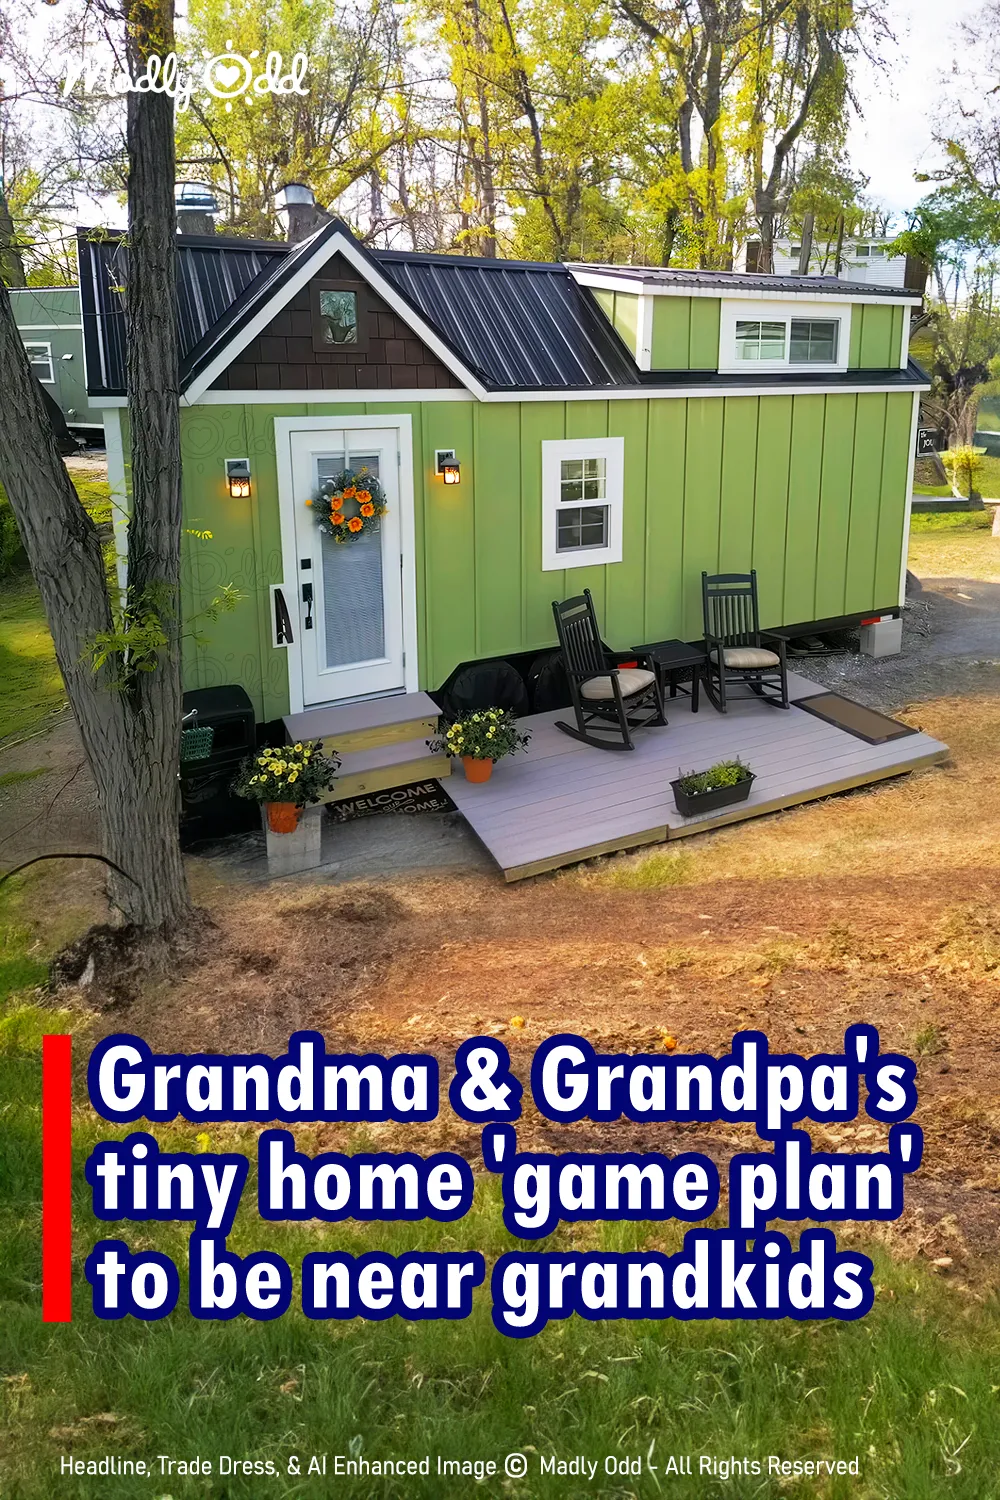 How Retirees Set Up Tiny Home Close to Kids for More Grandkid Time